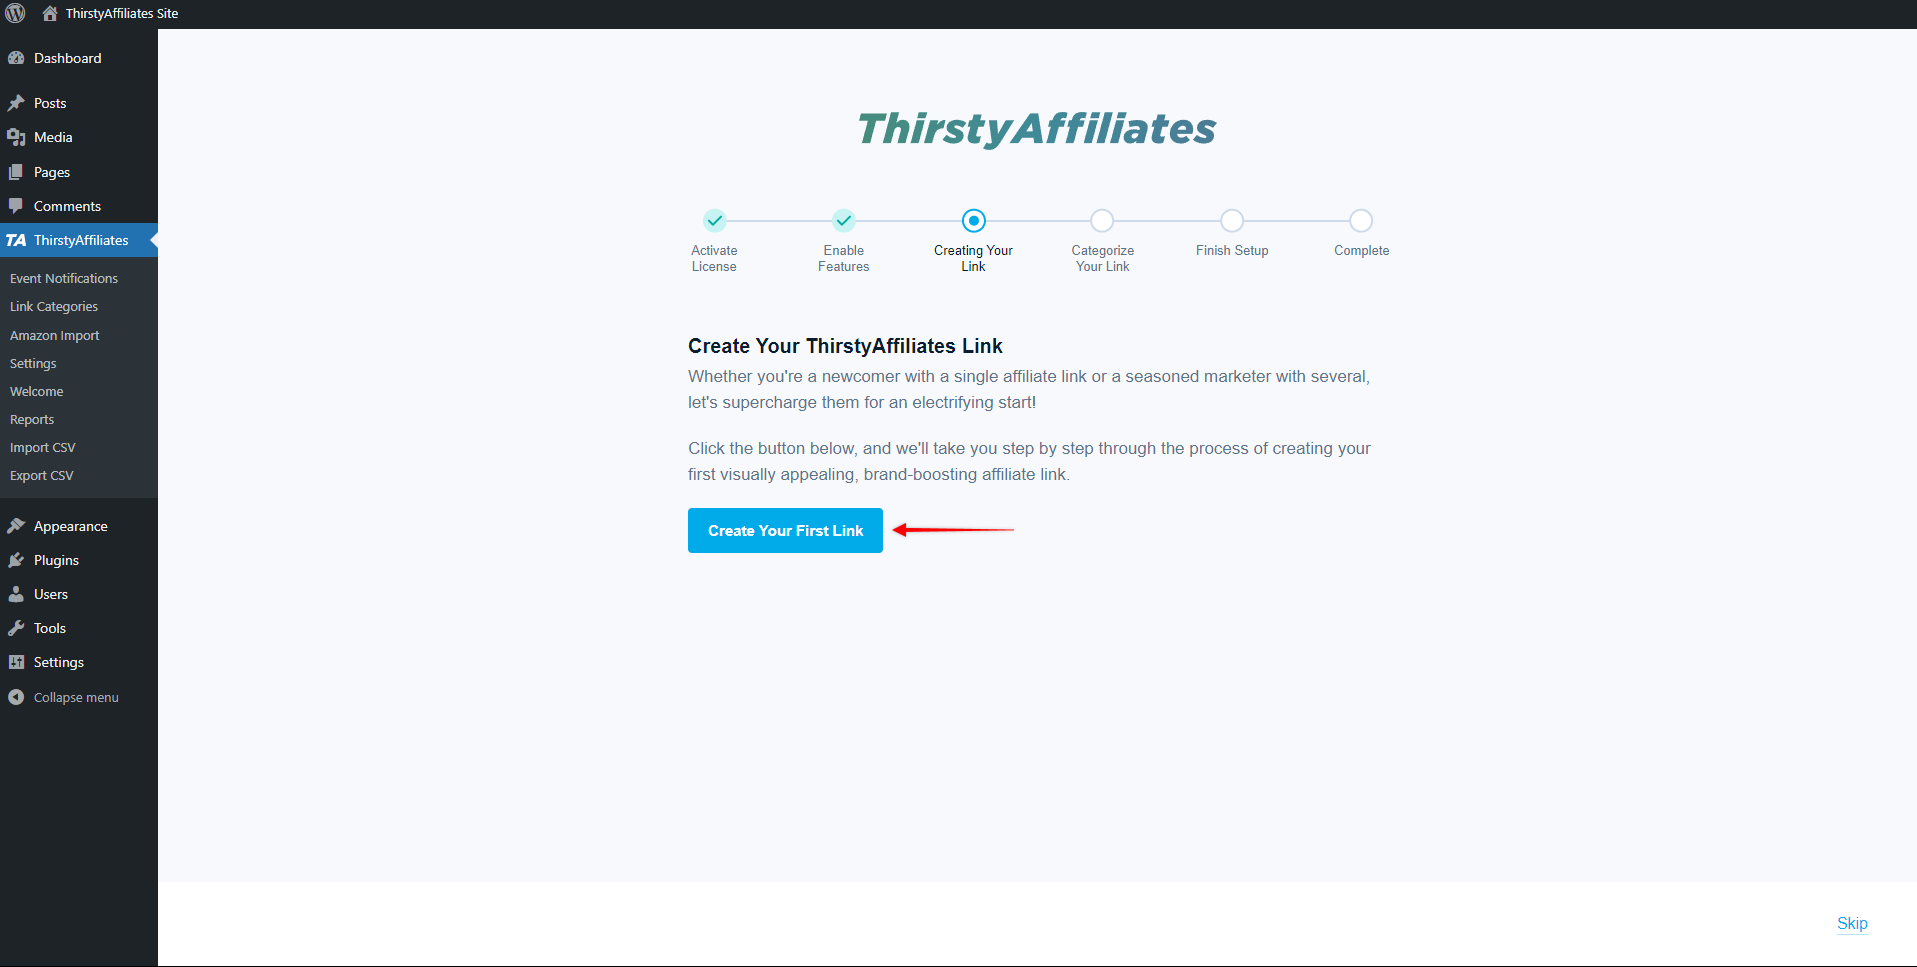 ThirstyAffiliates - Create Your First Link